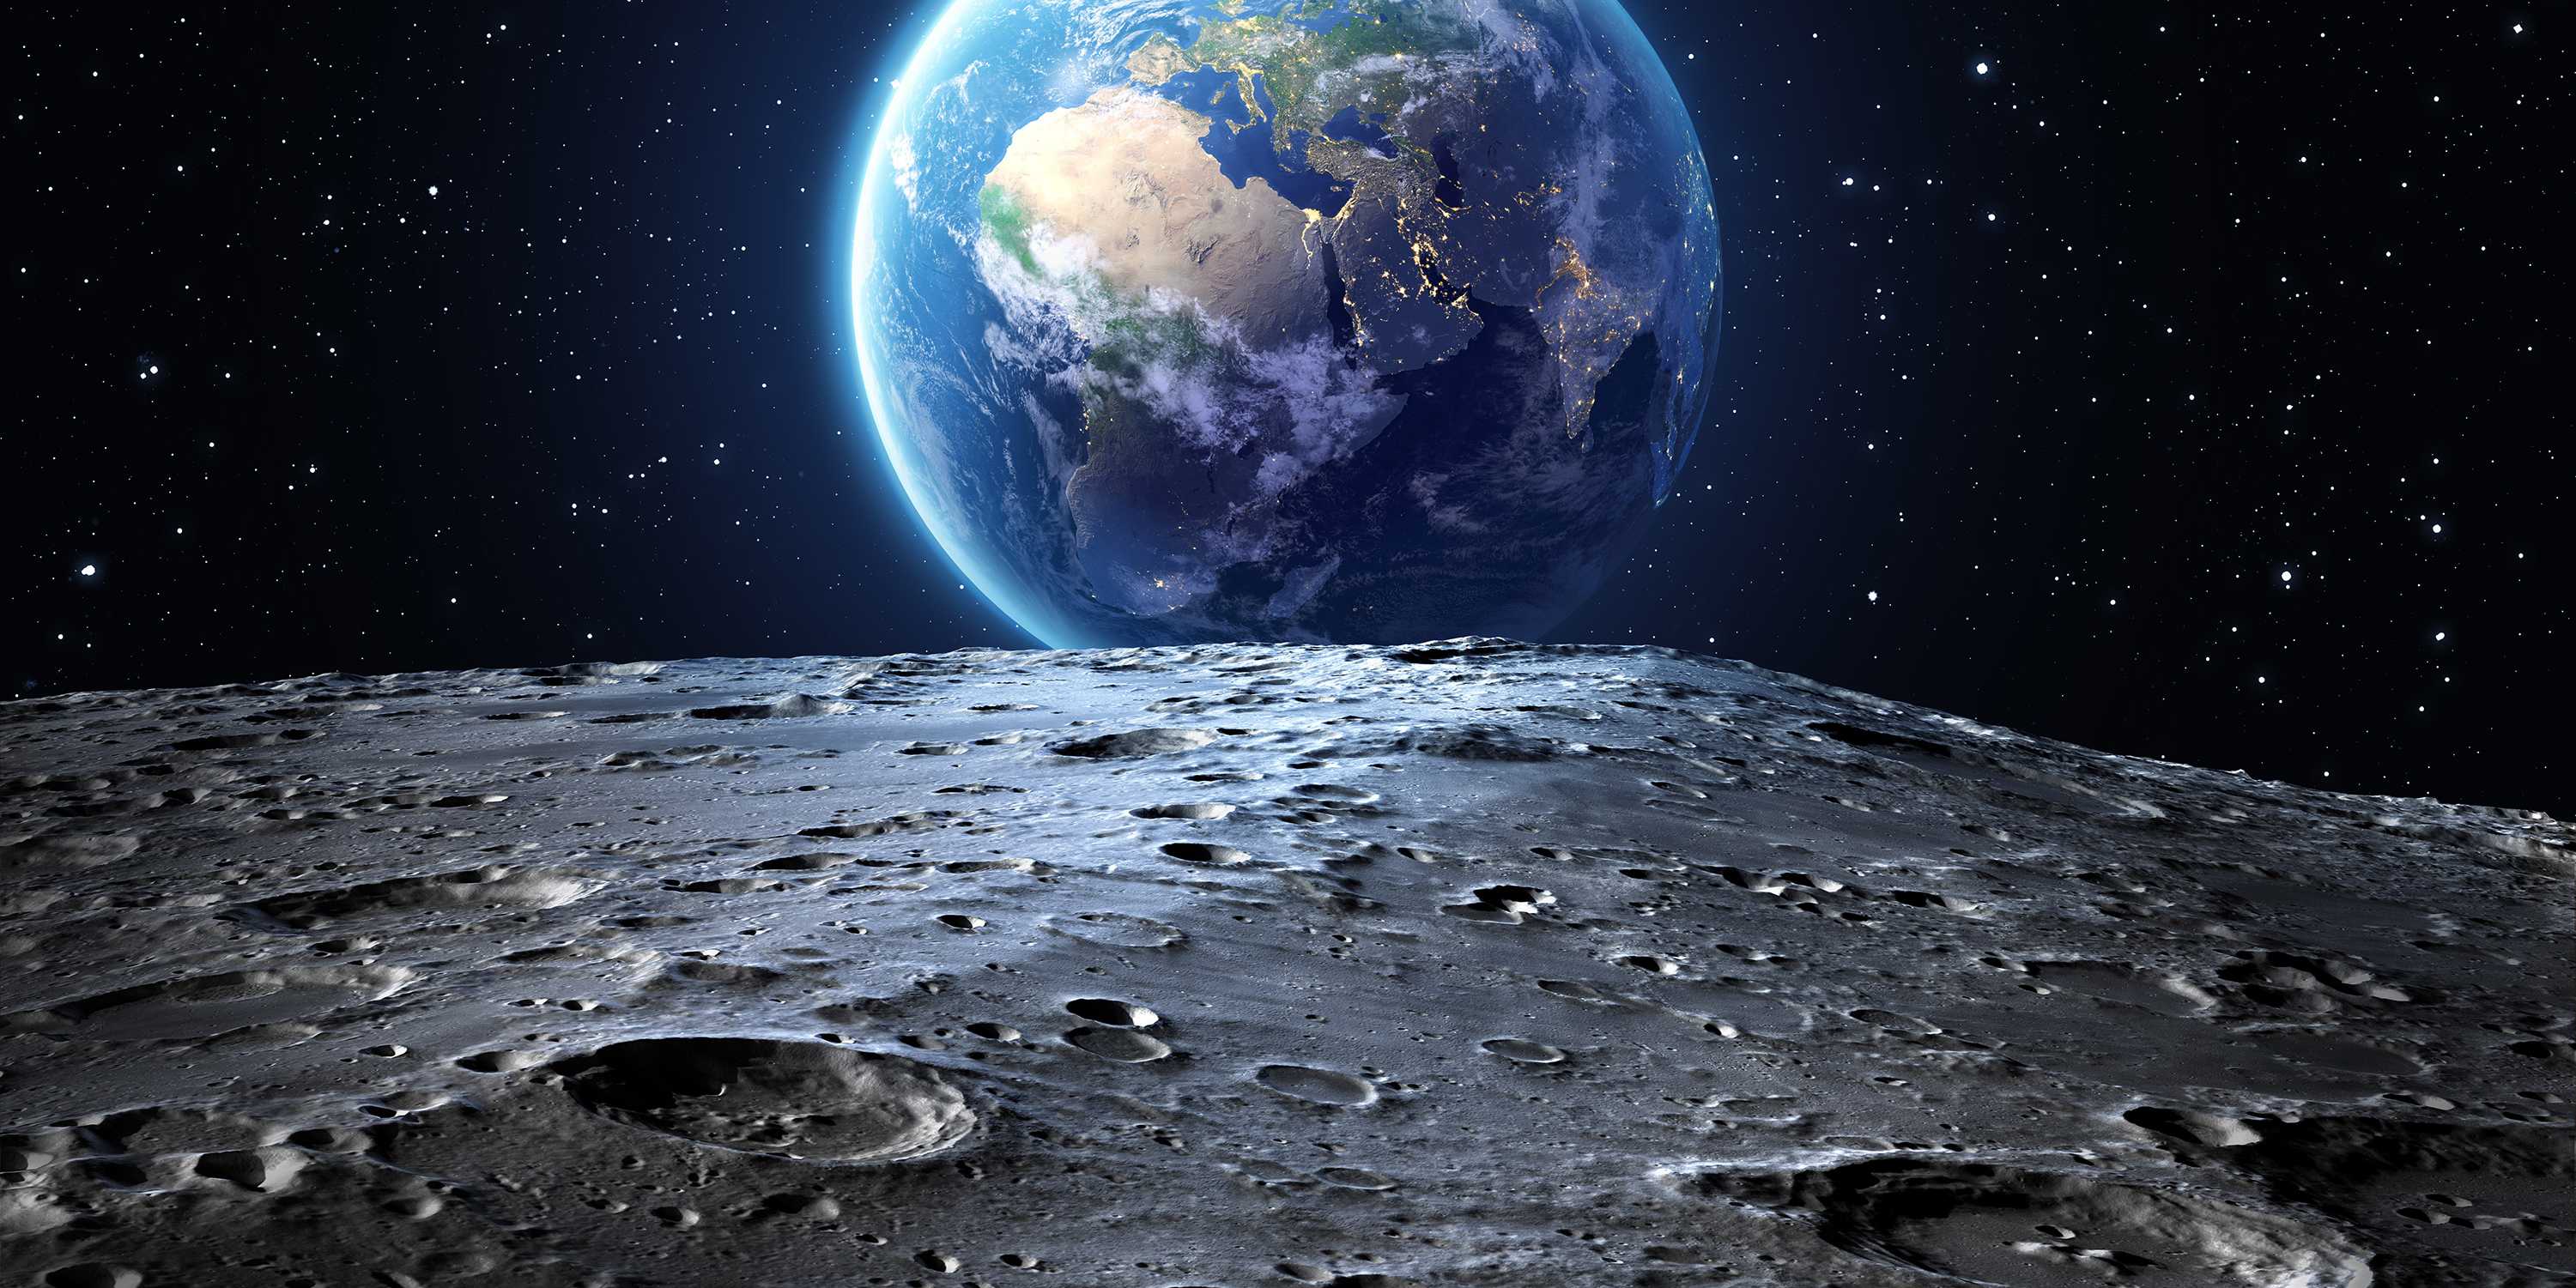 The earth seen from the moon